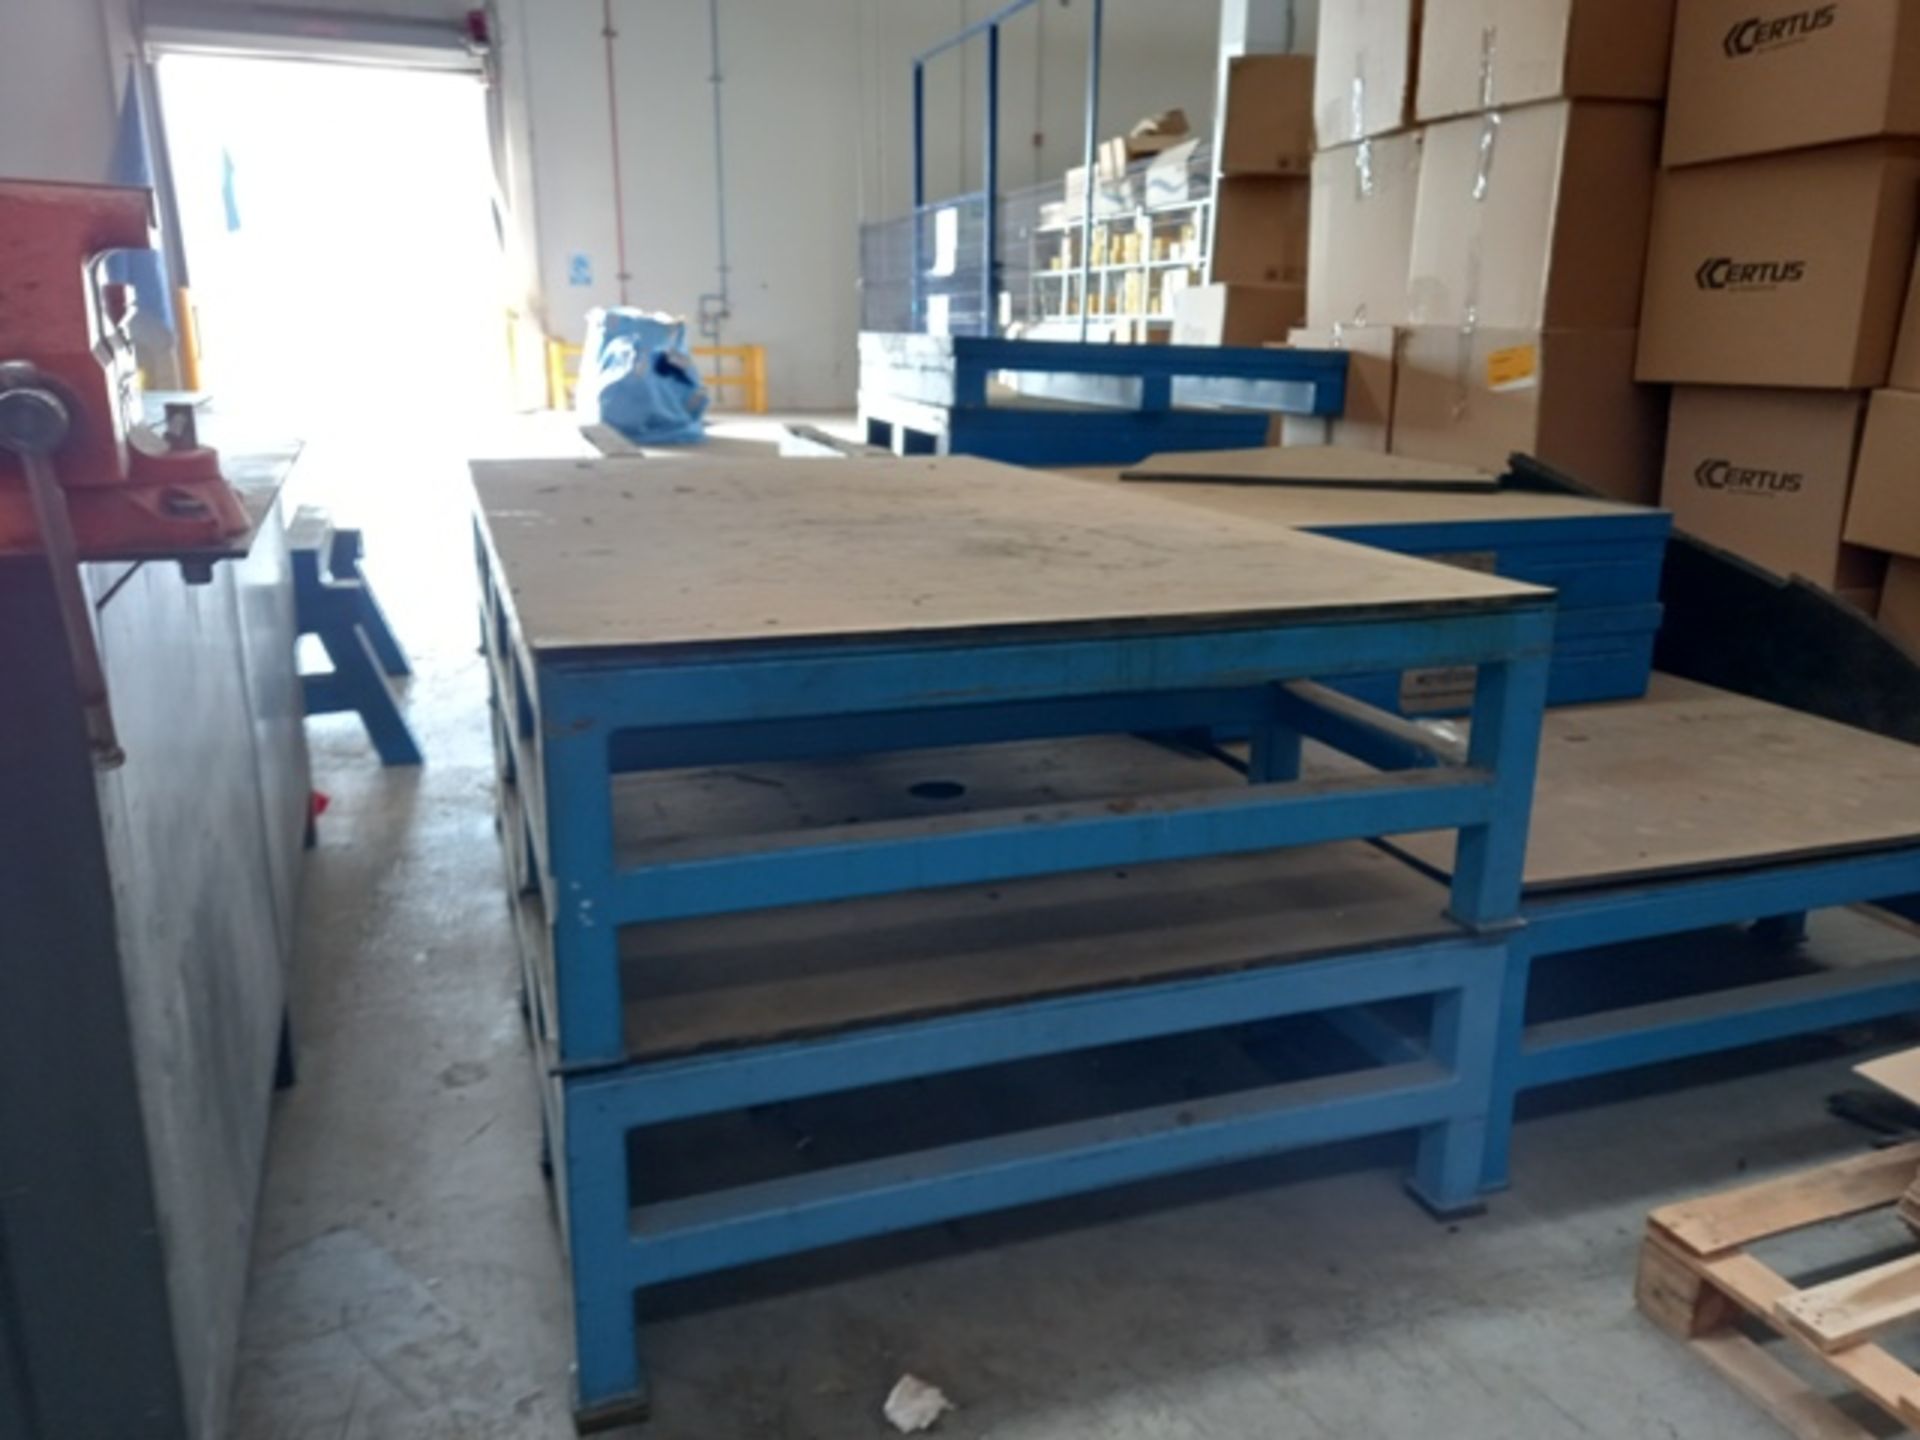 Work Tables and Misc. Tools Consisting of: (1) Industrial Work Table with Grinder, Press, Screws - Image 5 of 10